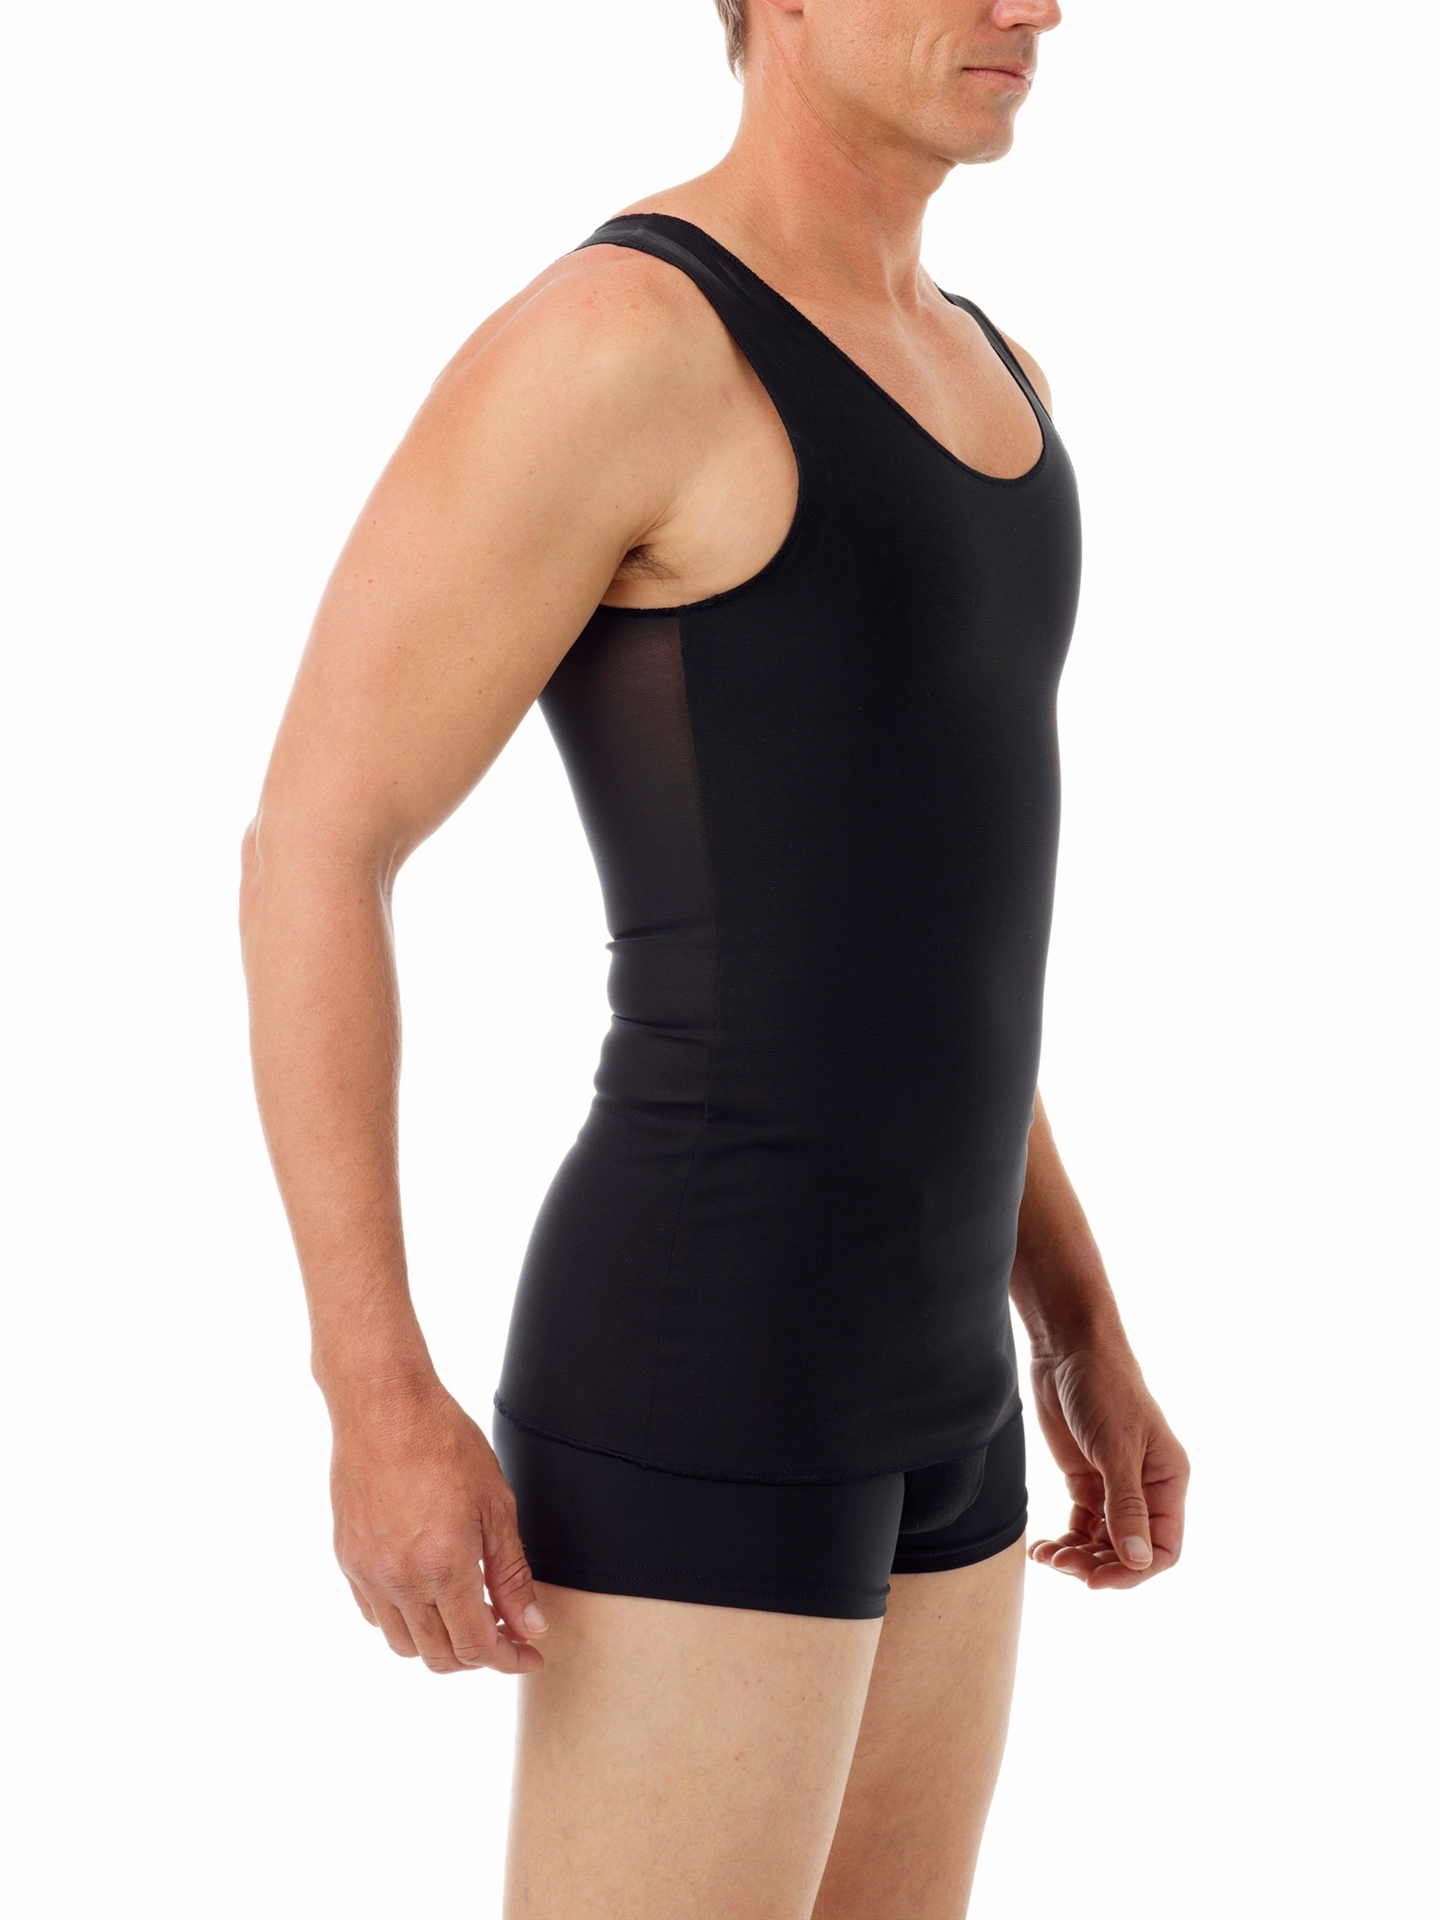 Womens Firm Compression Racerback Crop Top Chest Binder and Minimizer. FTM  Chest Binders for Trans Men by Underworks